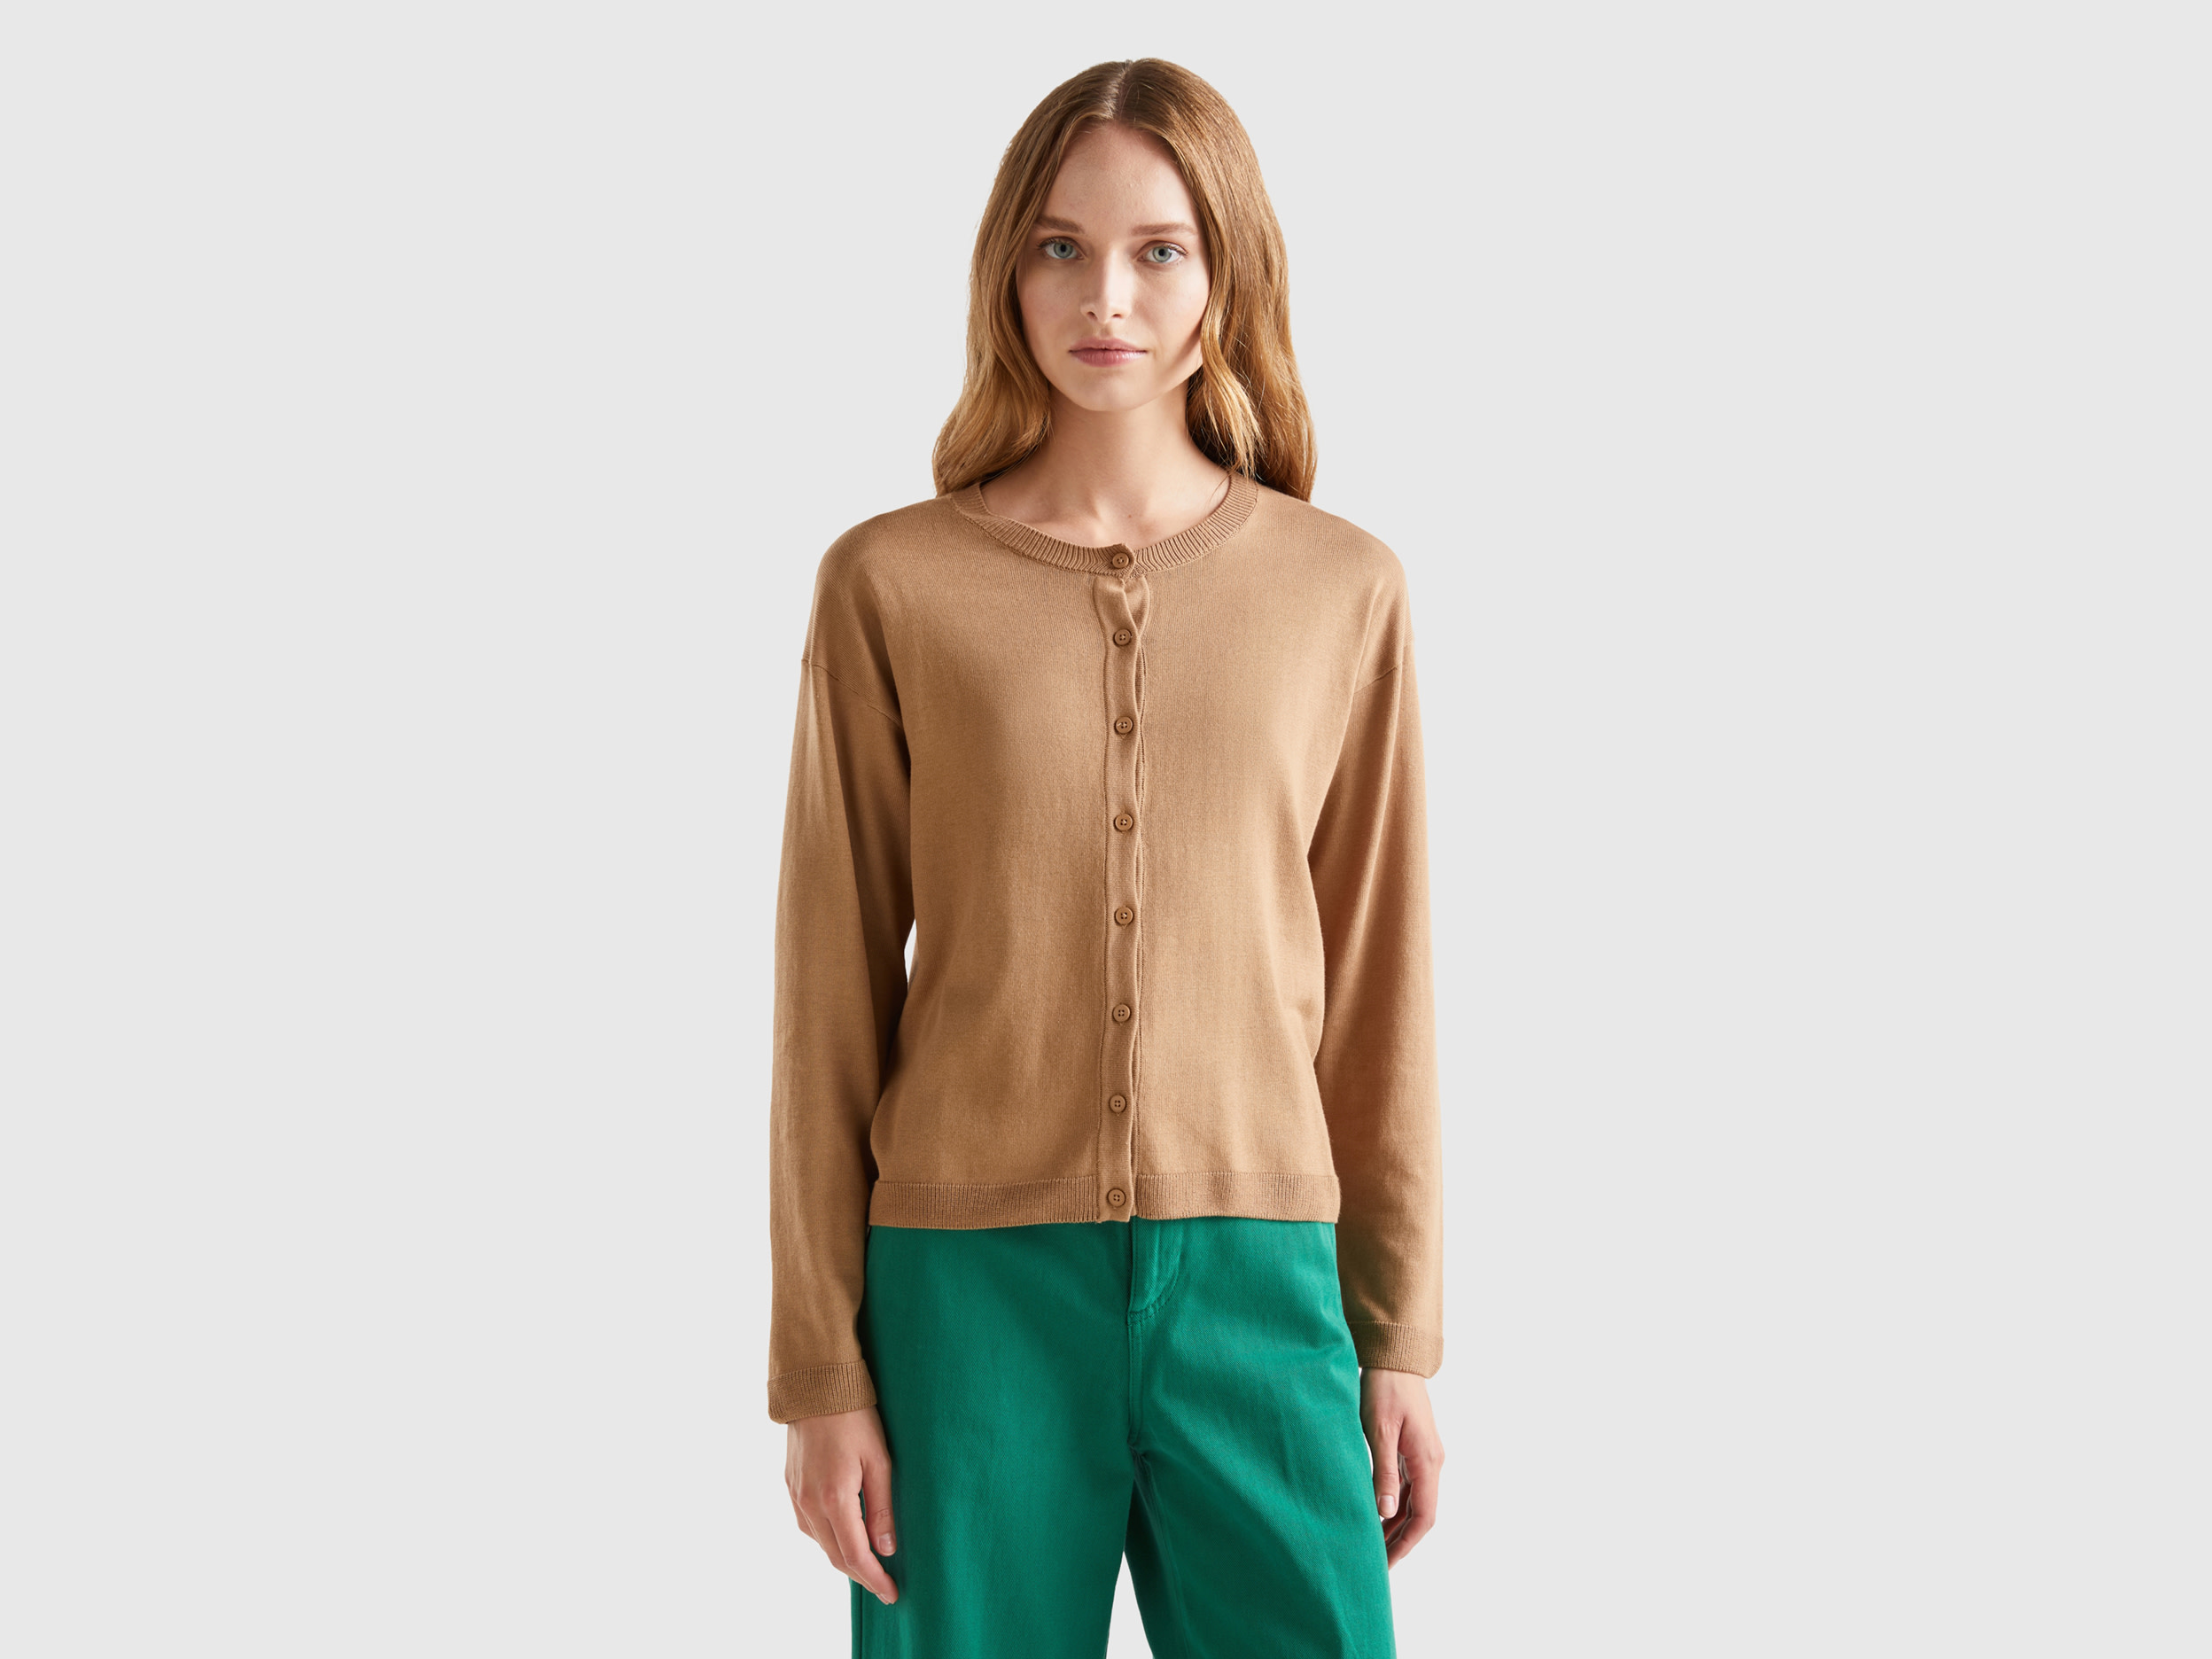 Benetton, Crew Neck Cardigan With Buttons, size M, Camel, Women